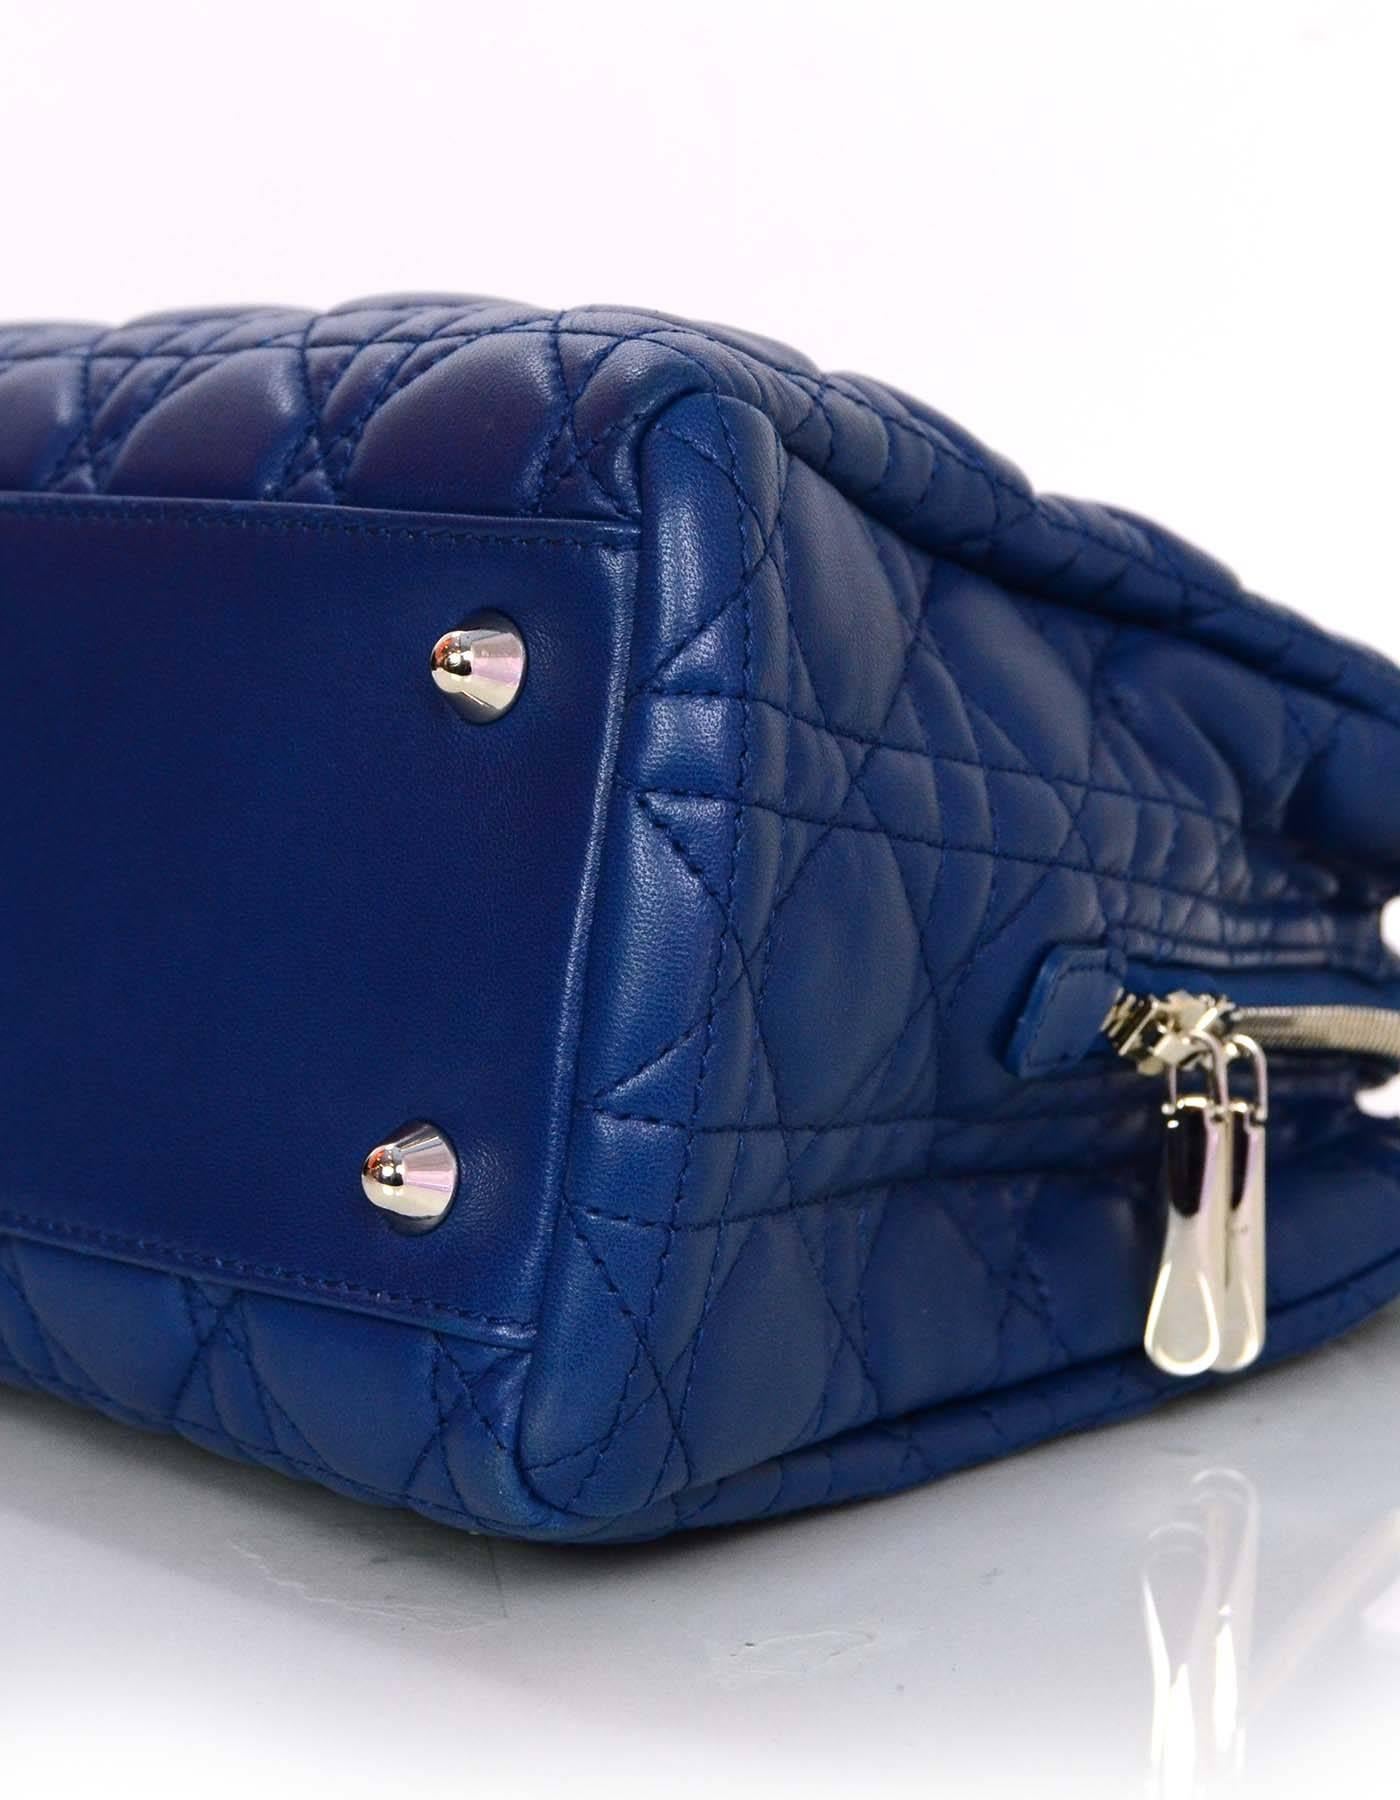 Women's Christian Dior Marine Blue Cannage Quilted Soft Leather Zipper Shopping Tote Bag